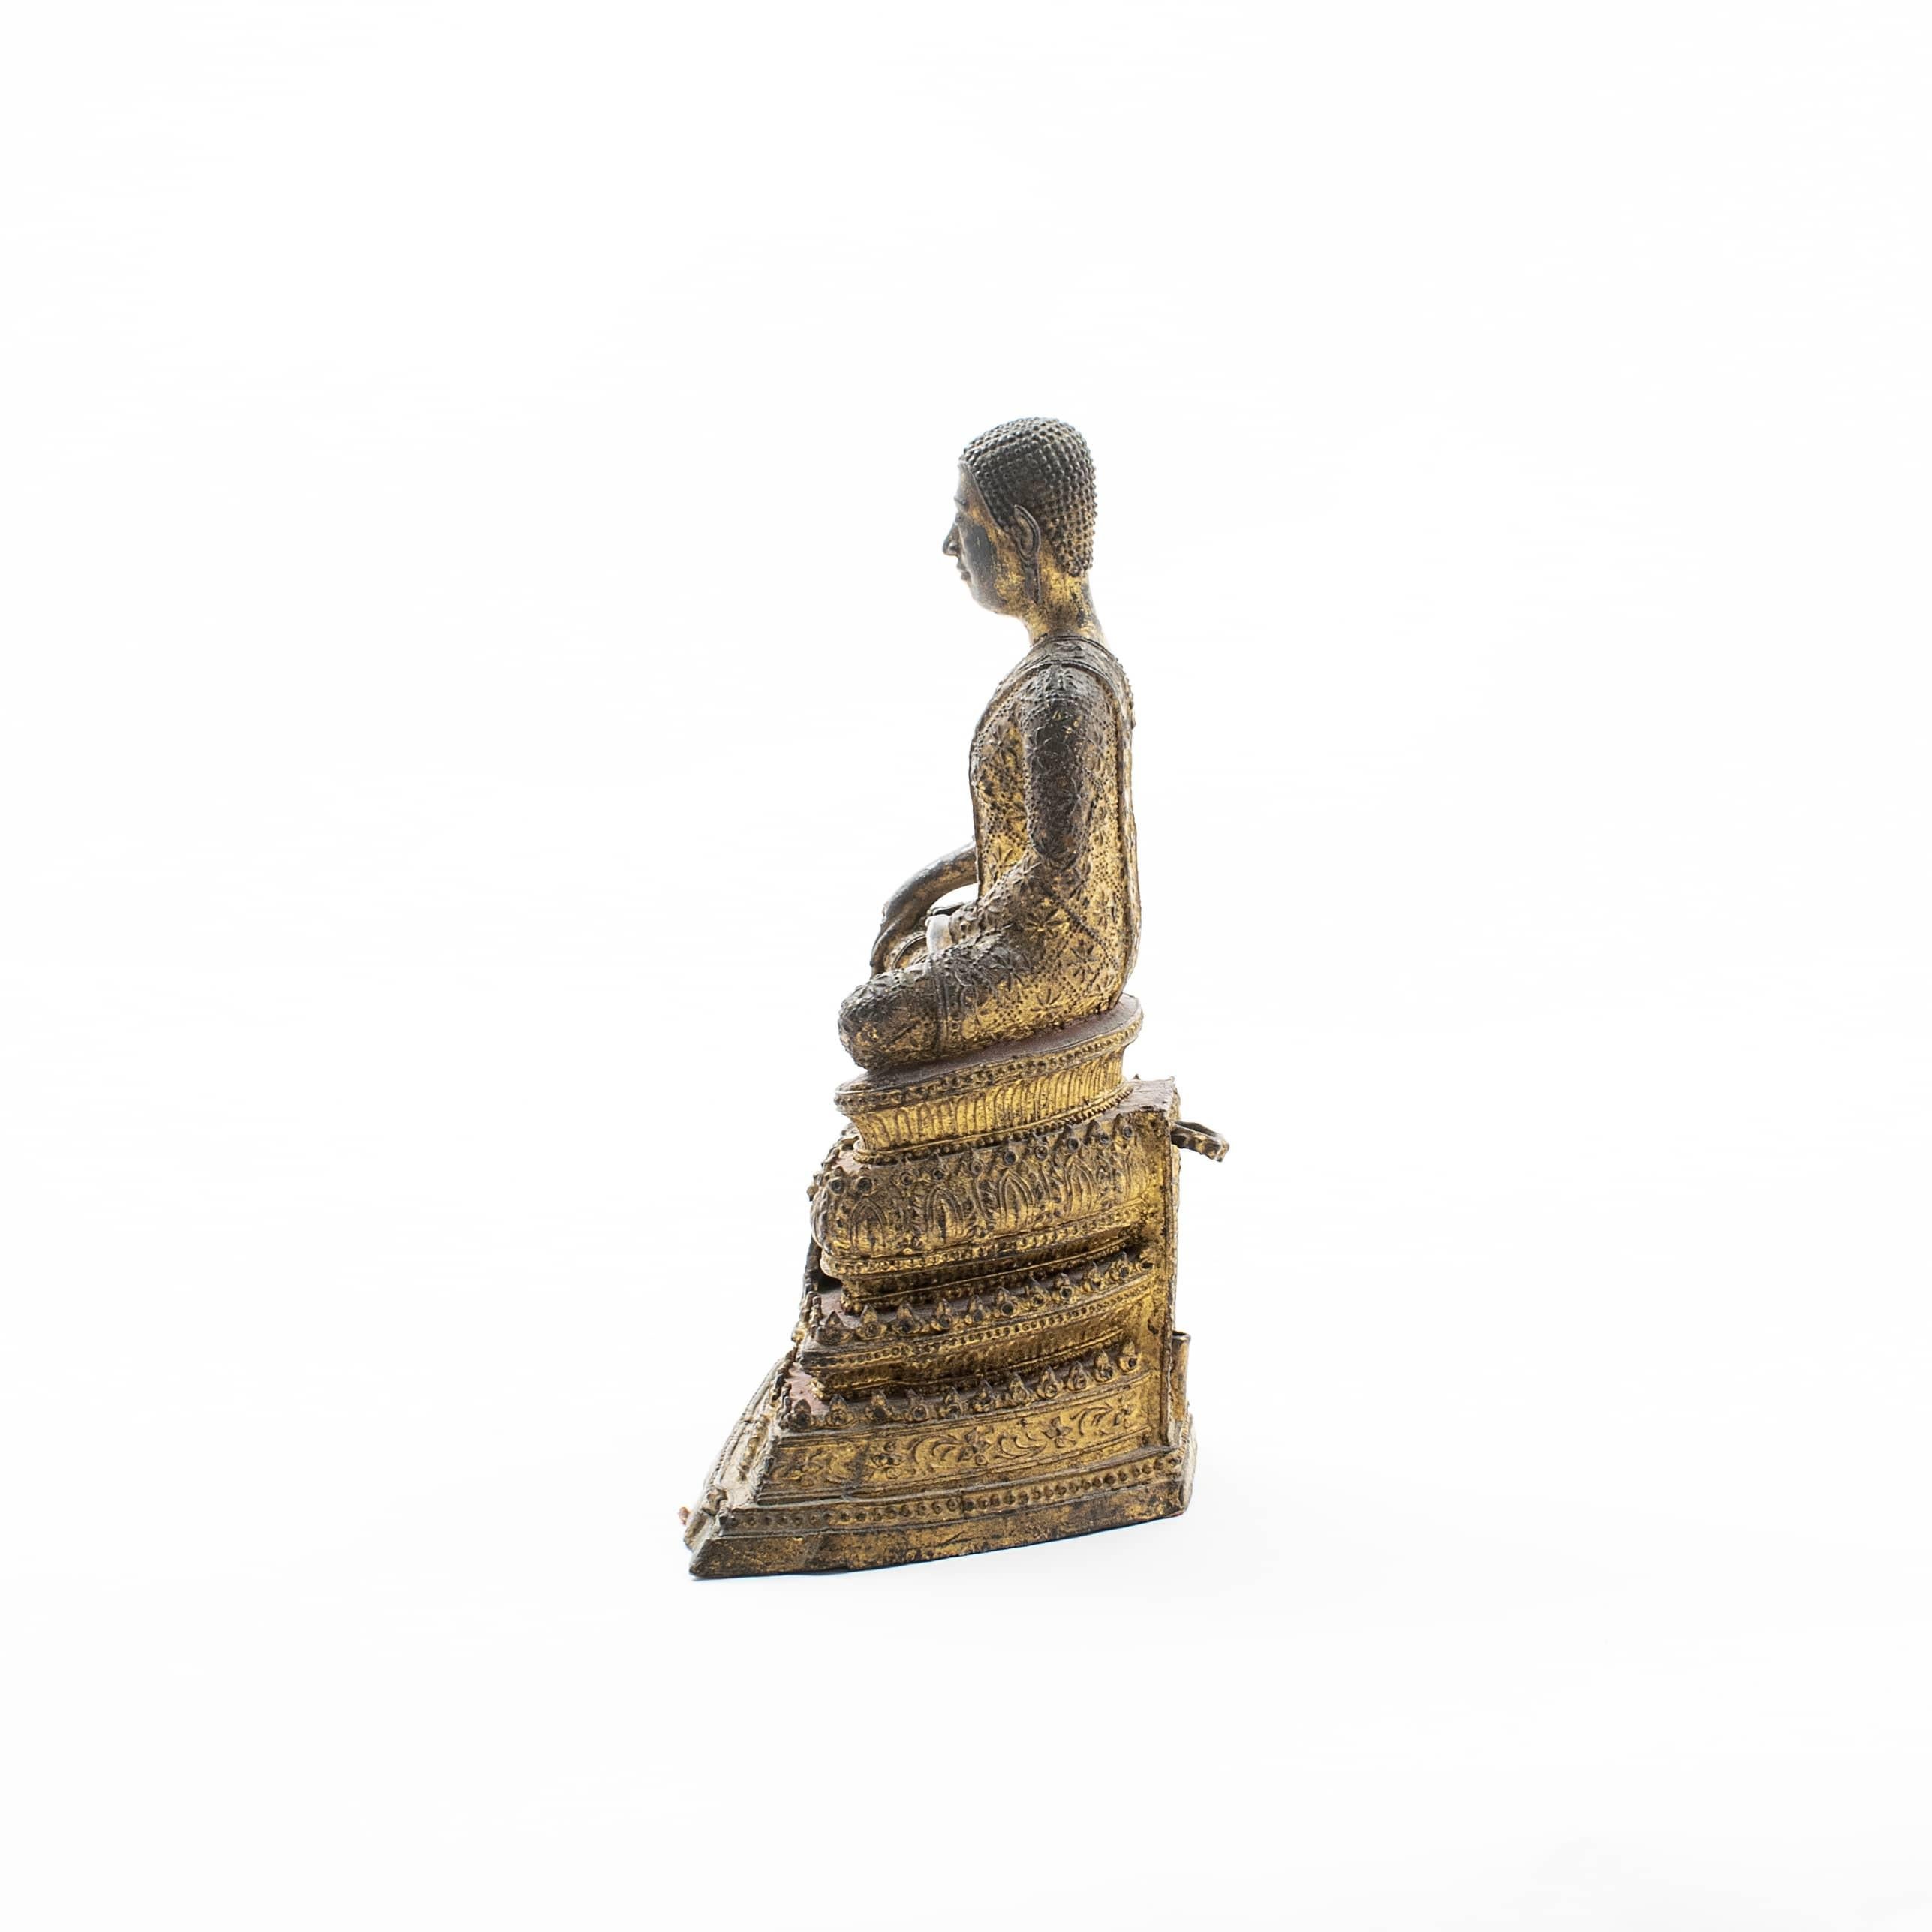 Gilt bronze Buddha figure seated in Bhumisparsha mudra position* (“calling the earth to witness”).
The Buddha sits upon a high gilt and red lacquer stepped platform.
Original untouched condition with a very beautiful age-related patina.

Siam,